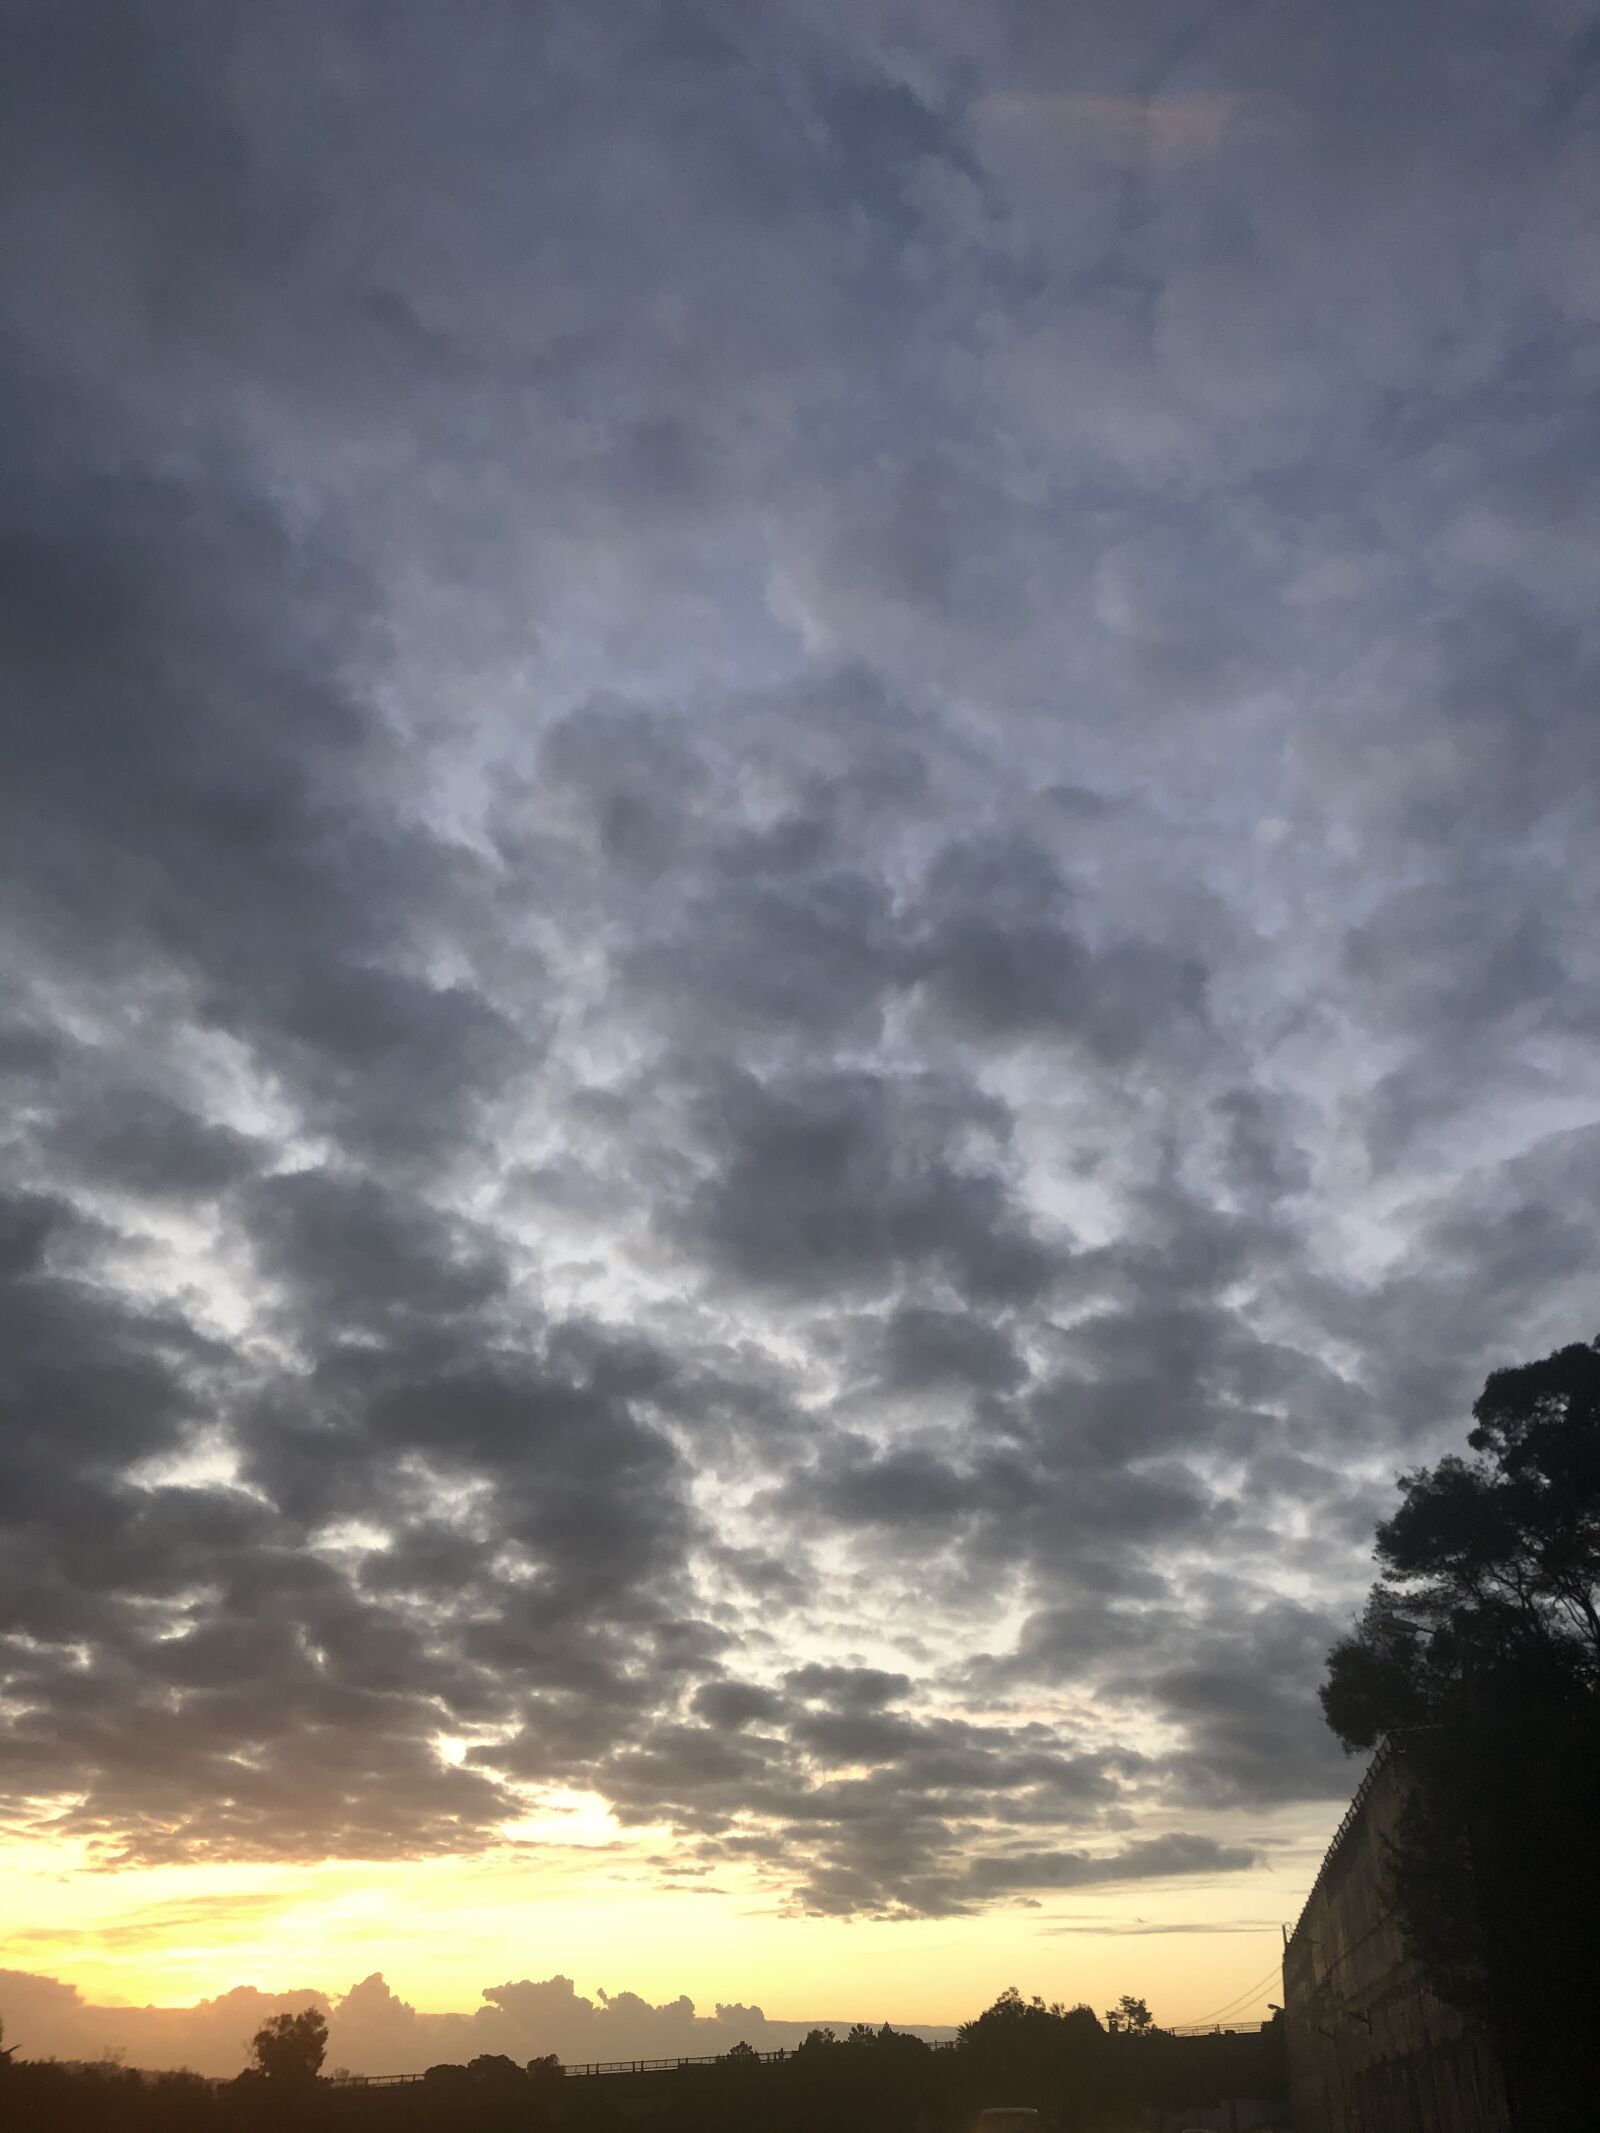 Apple iPhone X sample photo. Sunset, landscape, clouds photography